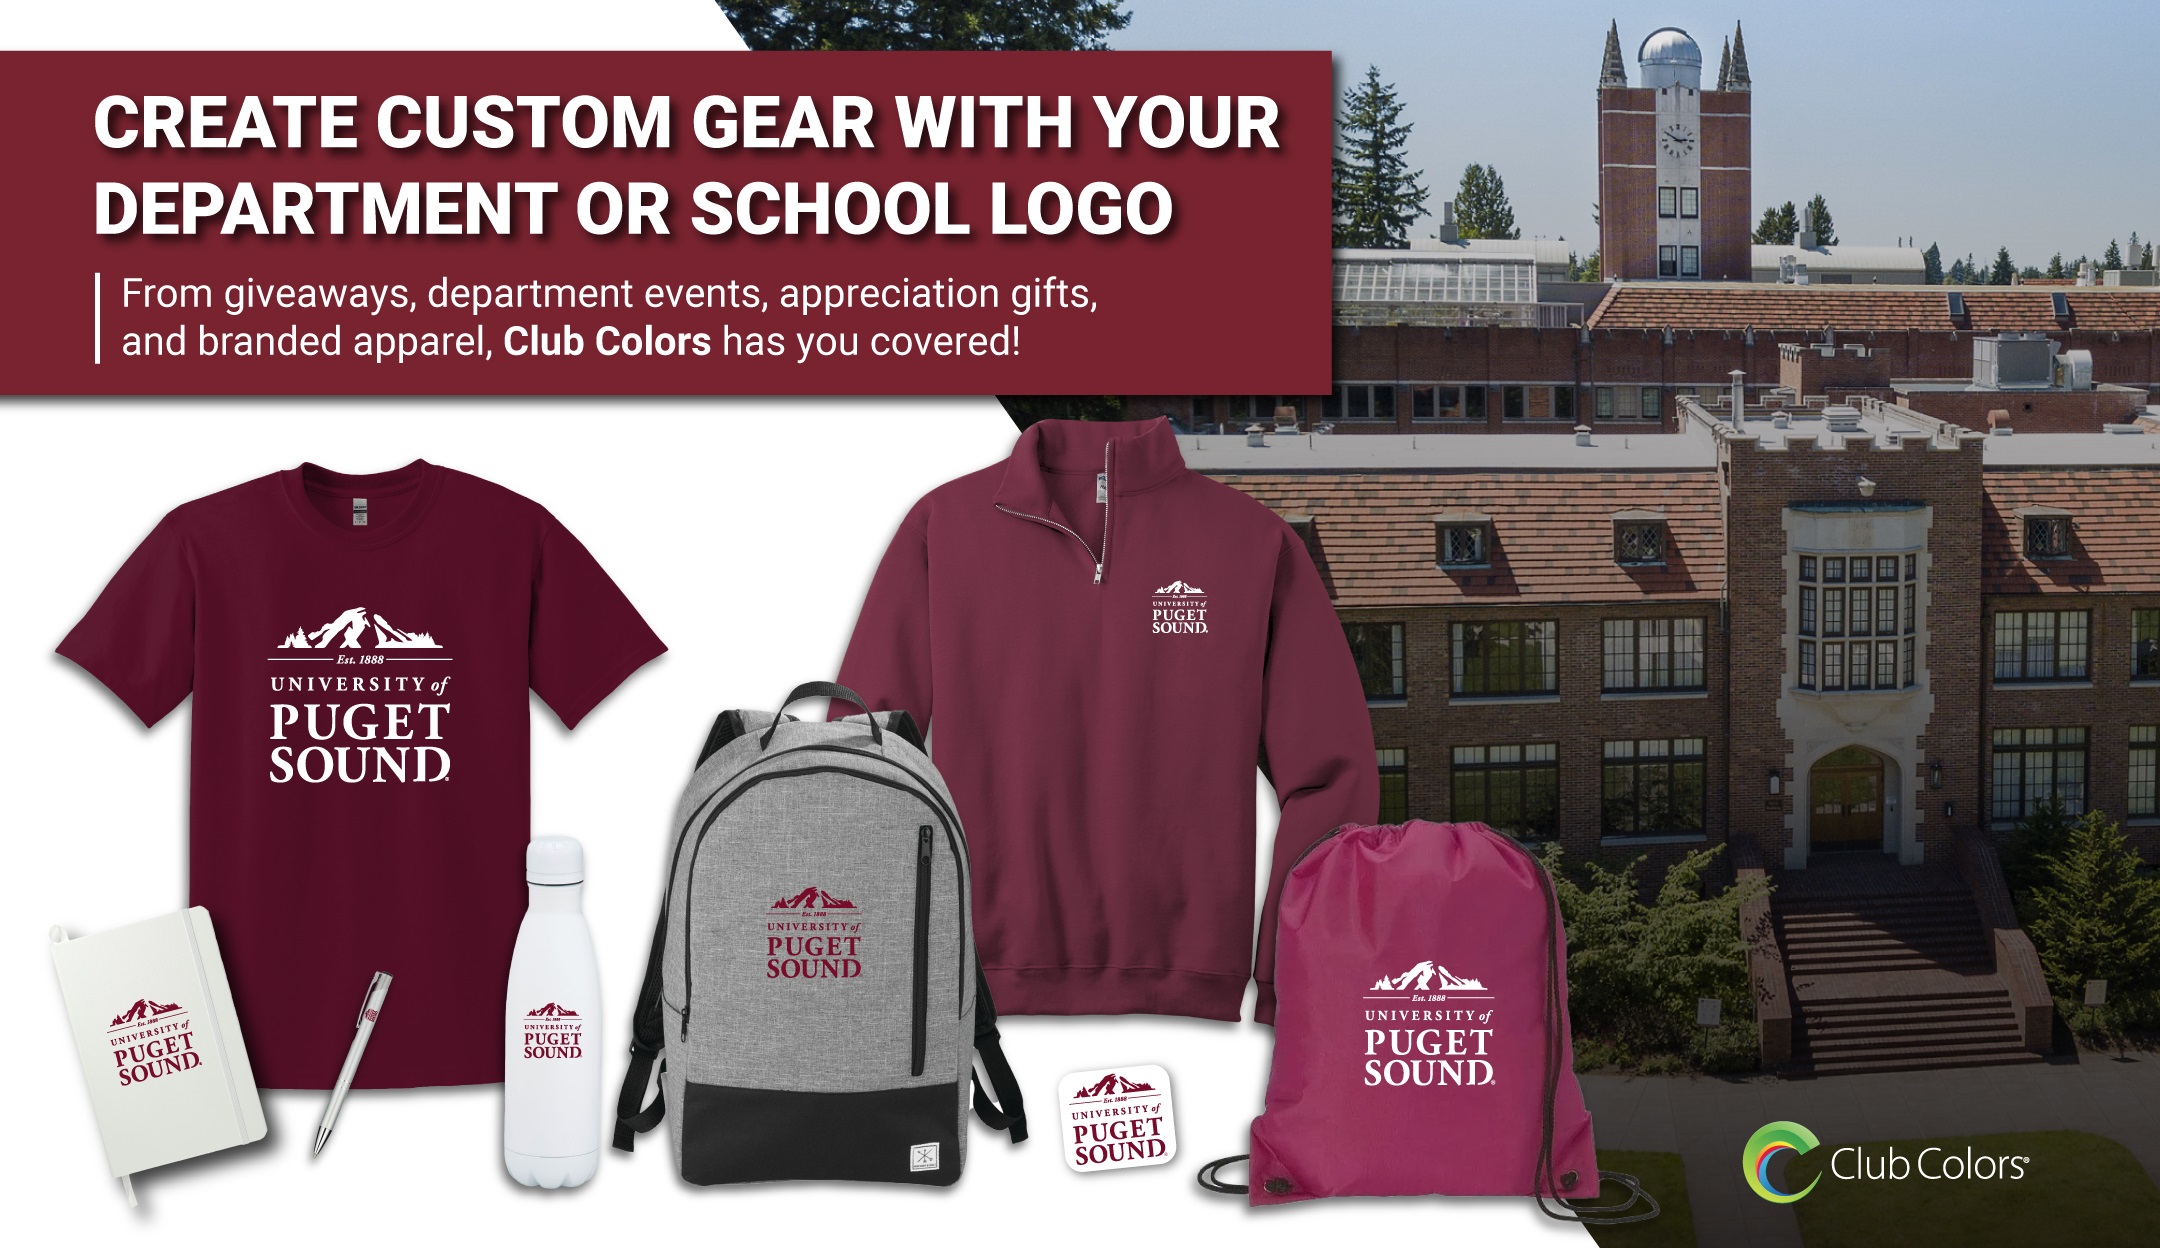 Create custom gear with your department or school logo.